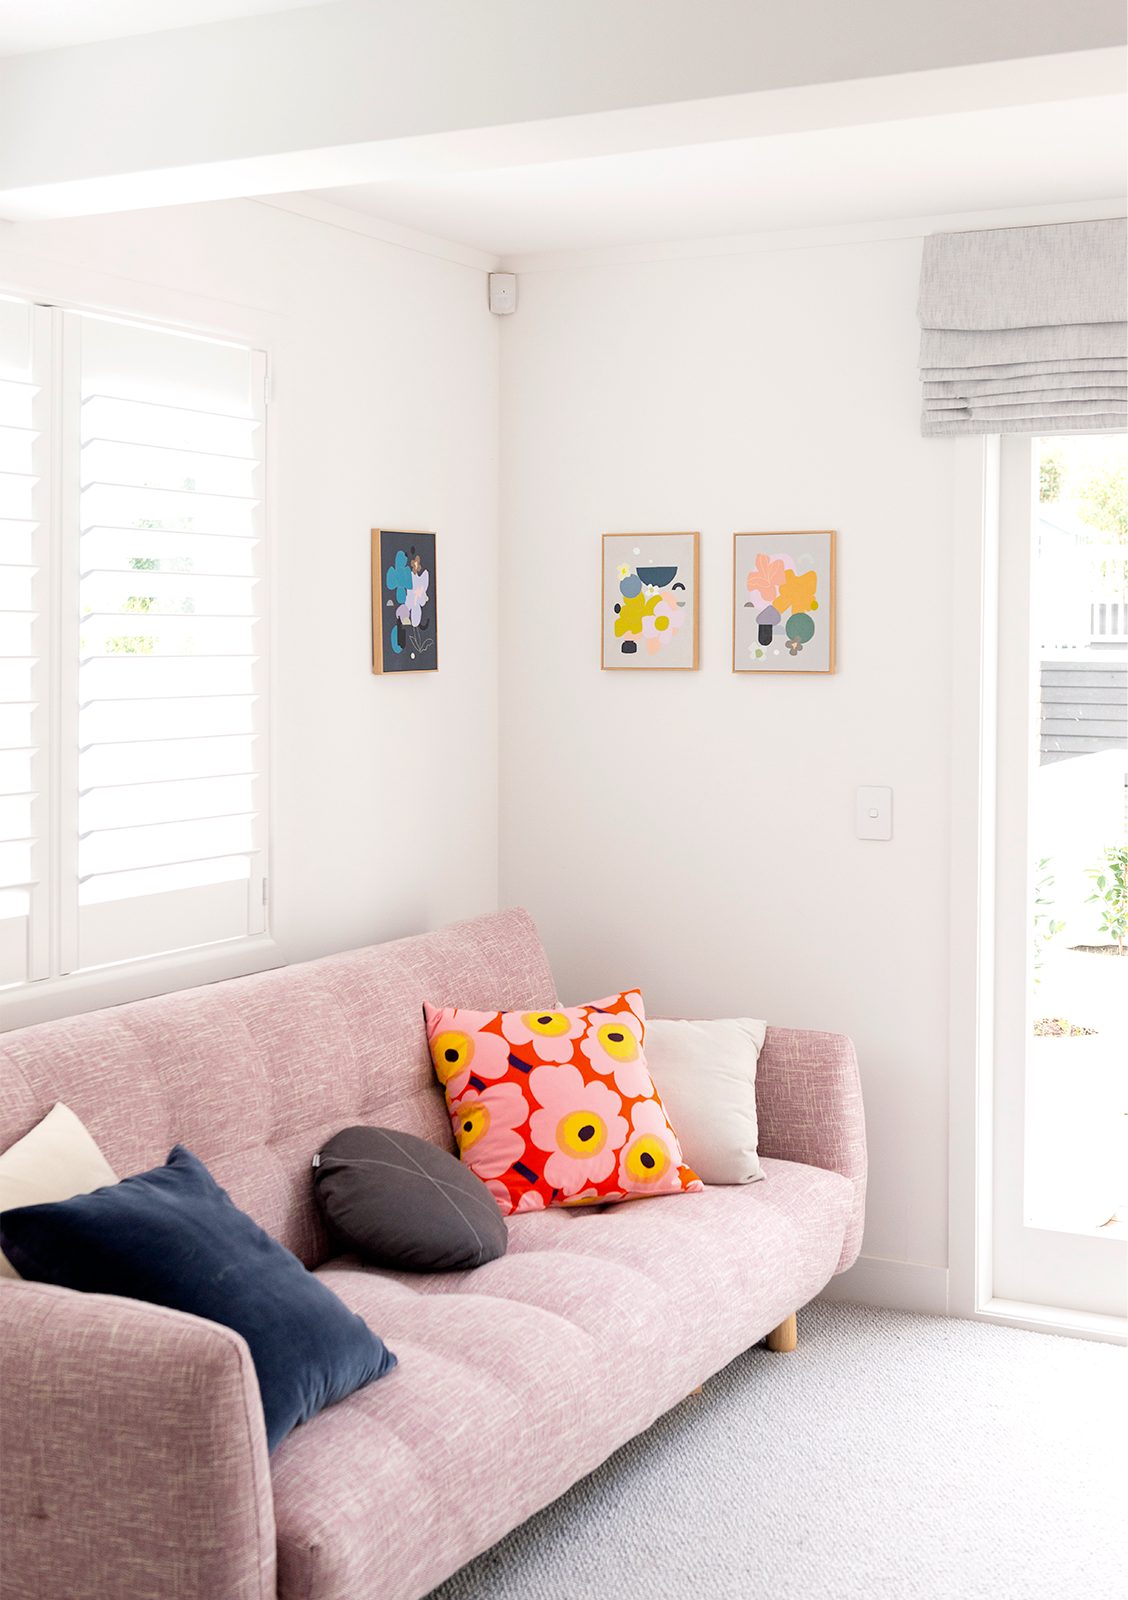 Pink couch with colourful cushions and artwork on the walls